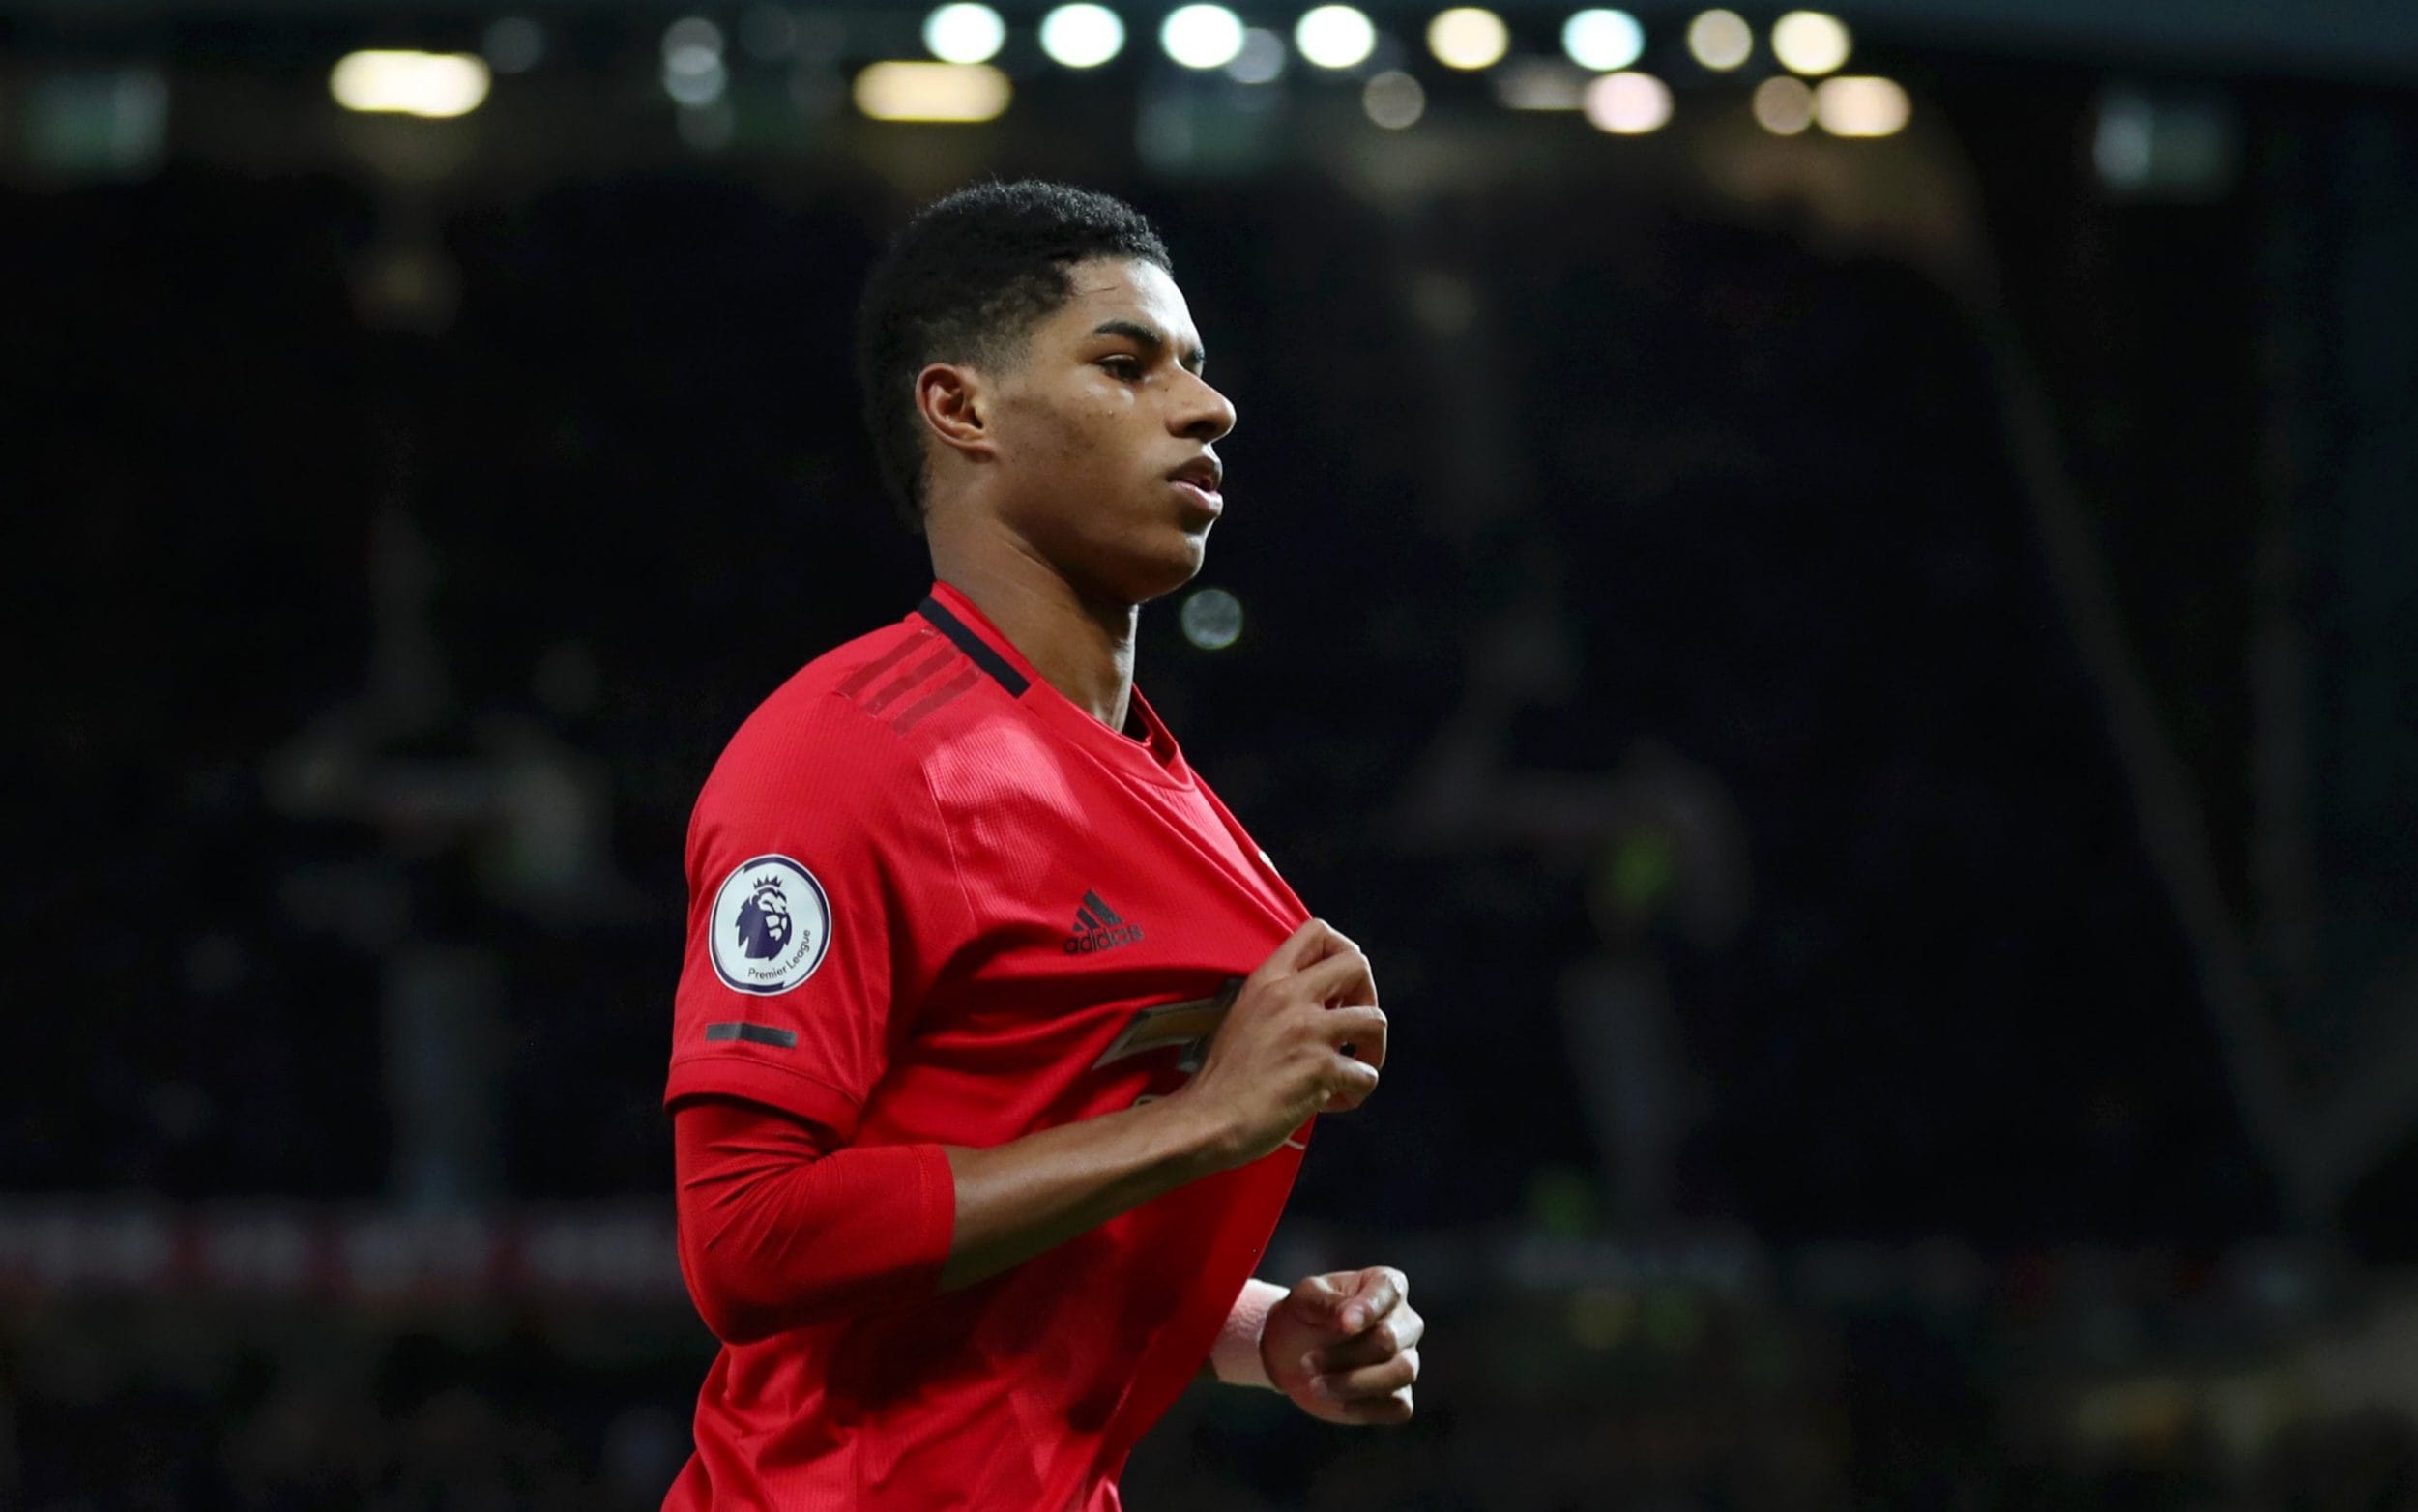 Marcus Rashford is beginning to look like the one, consistently excelling in a Manchester United team no longer among the elite